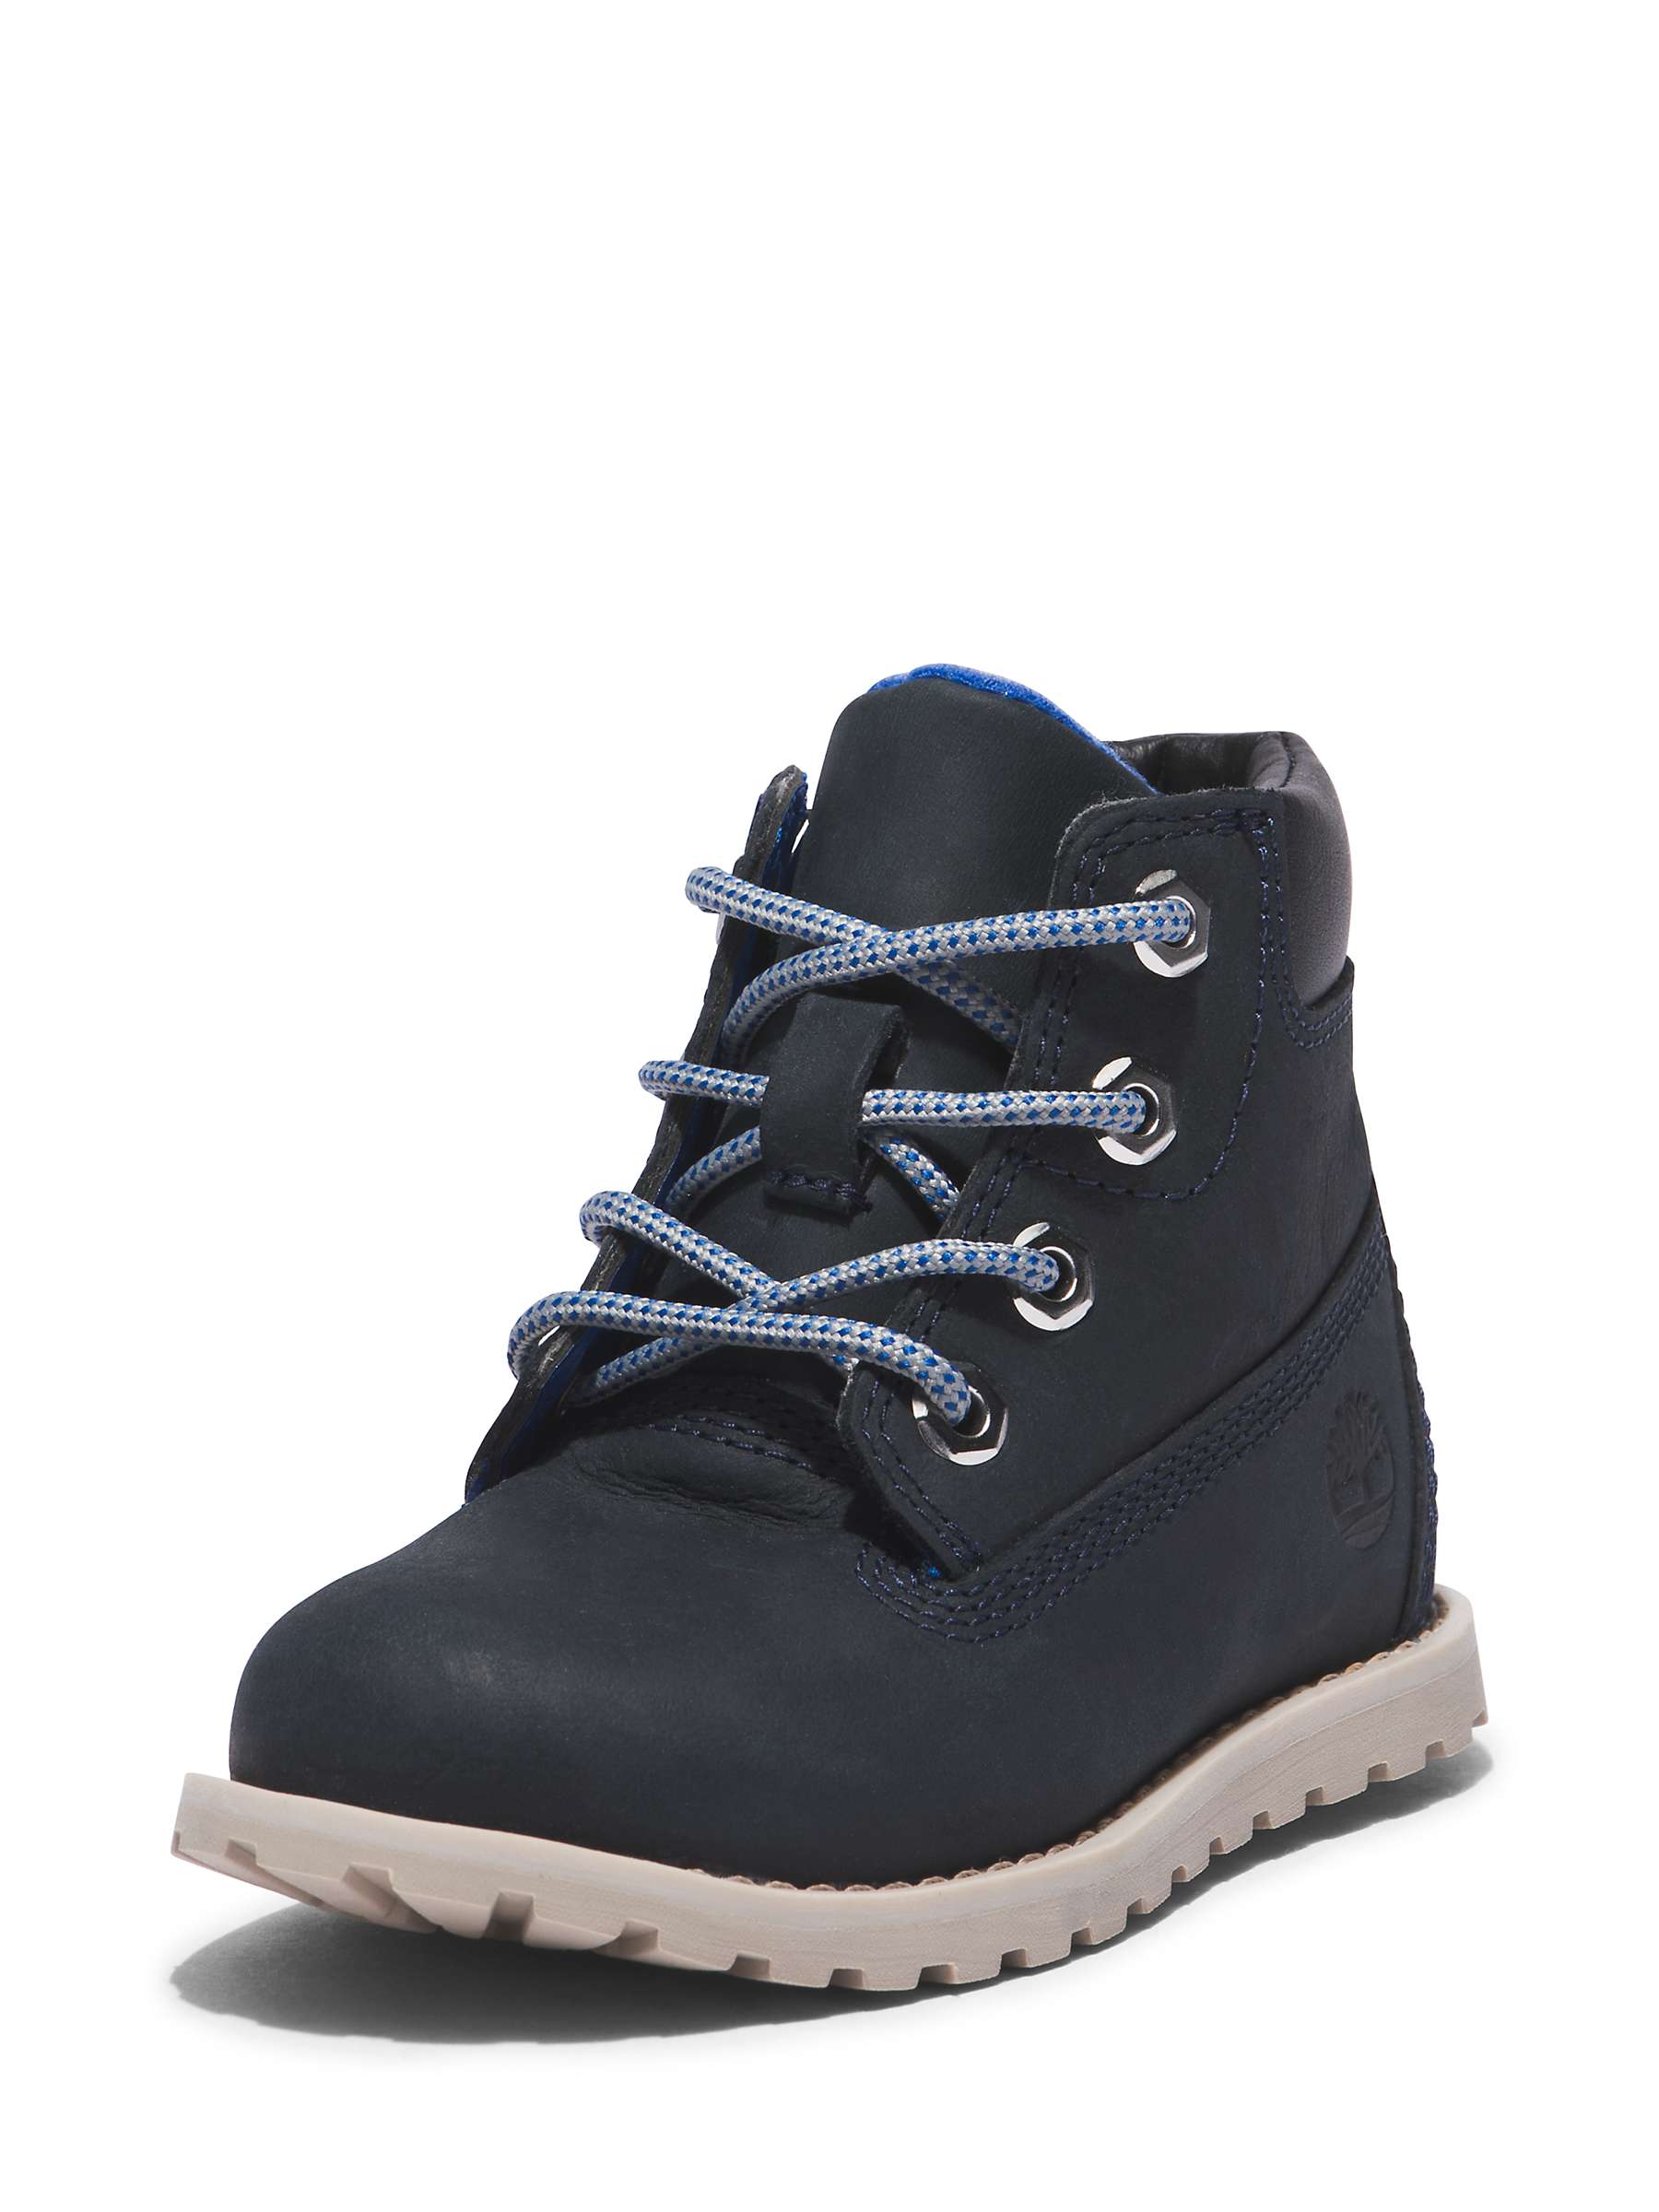 Buy Timberland Kids' Pokey Pine Ankle Boots Online at johnlewis.com